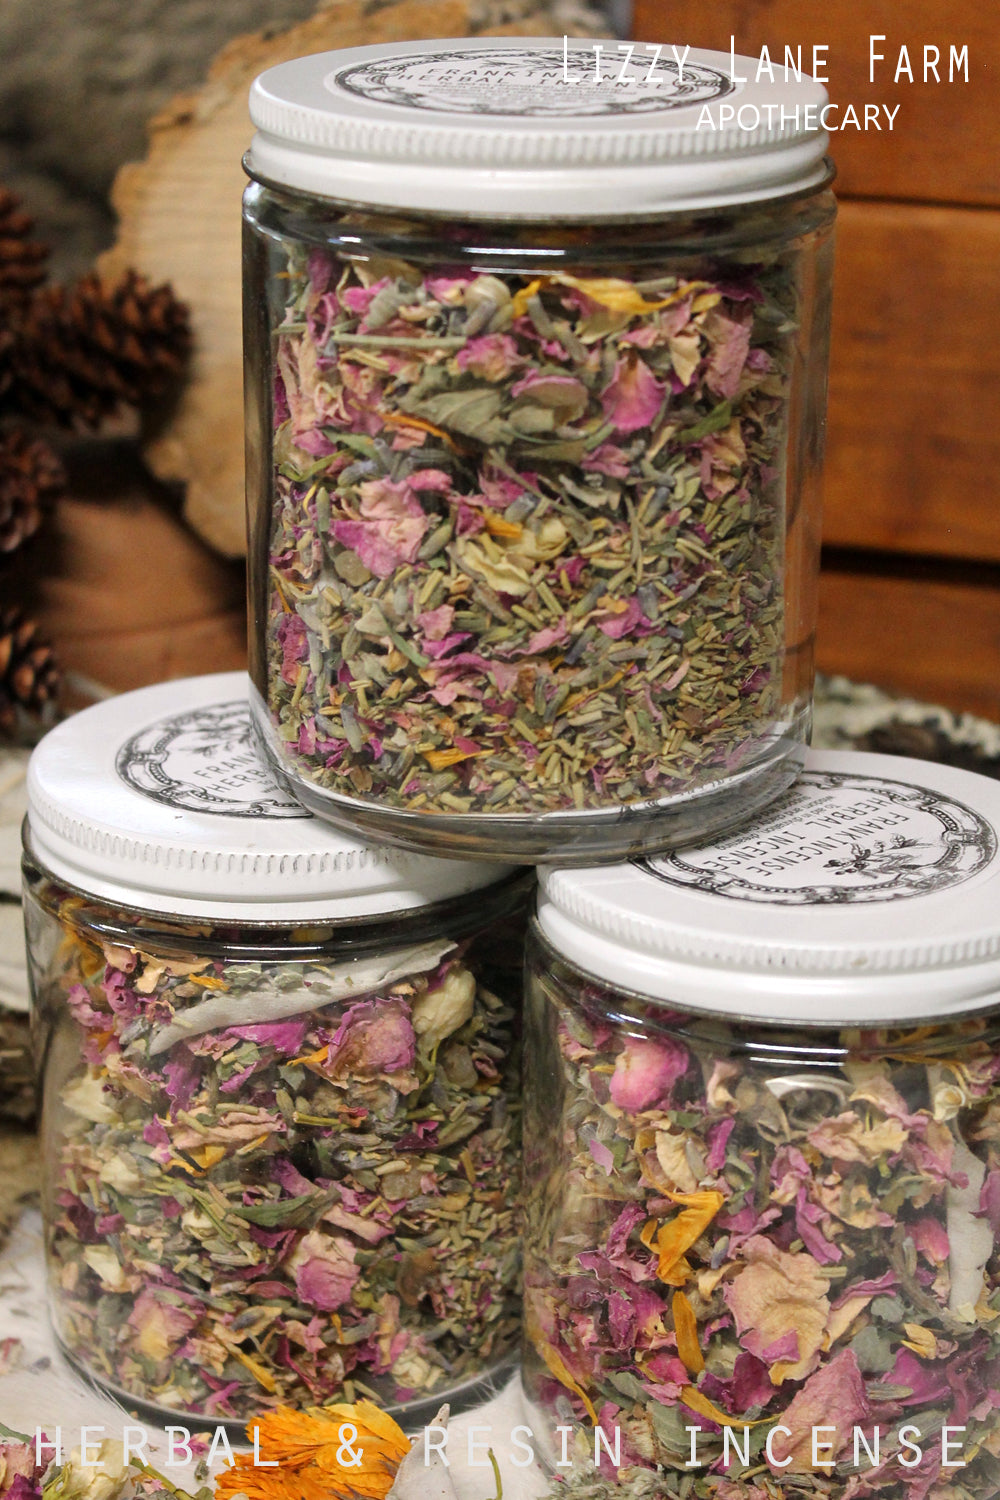 Frolic Herbal Incense - Lizzy Lane Farm Apothecary